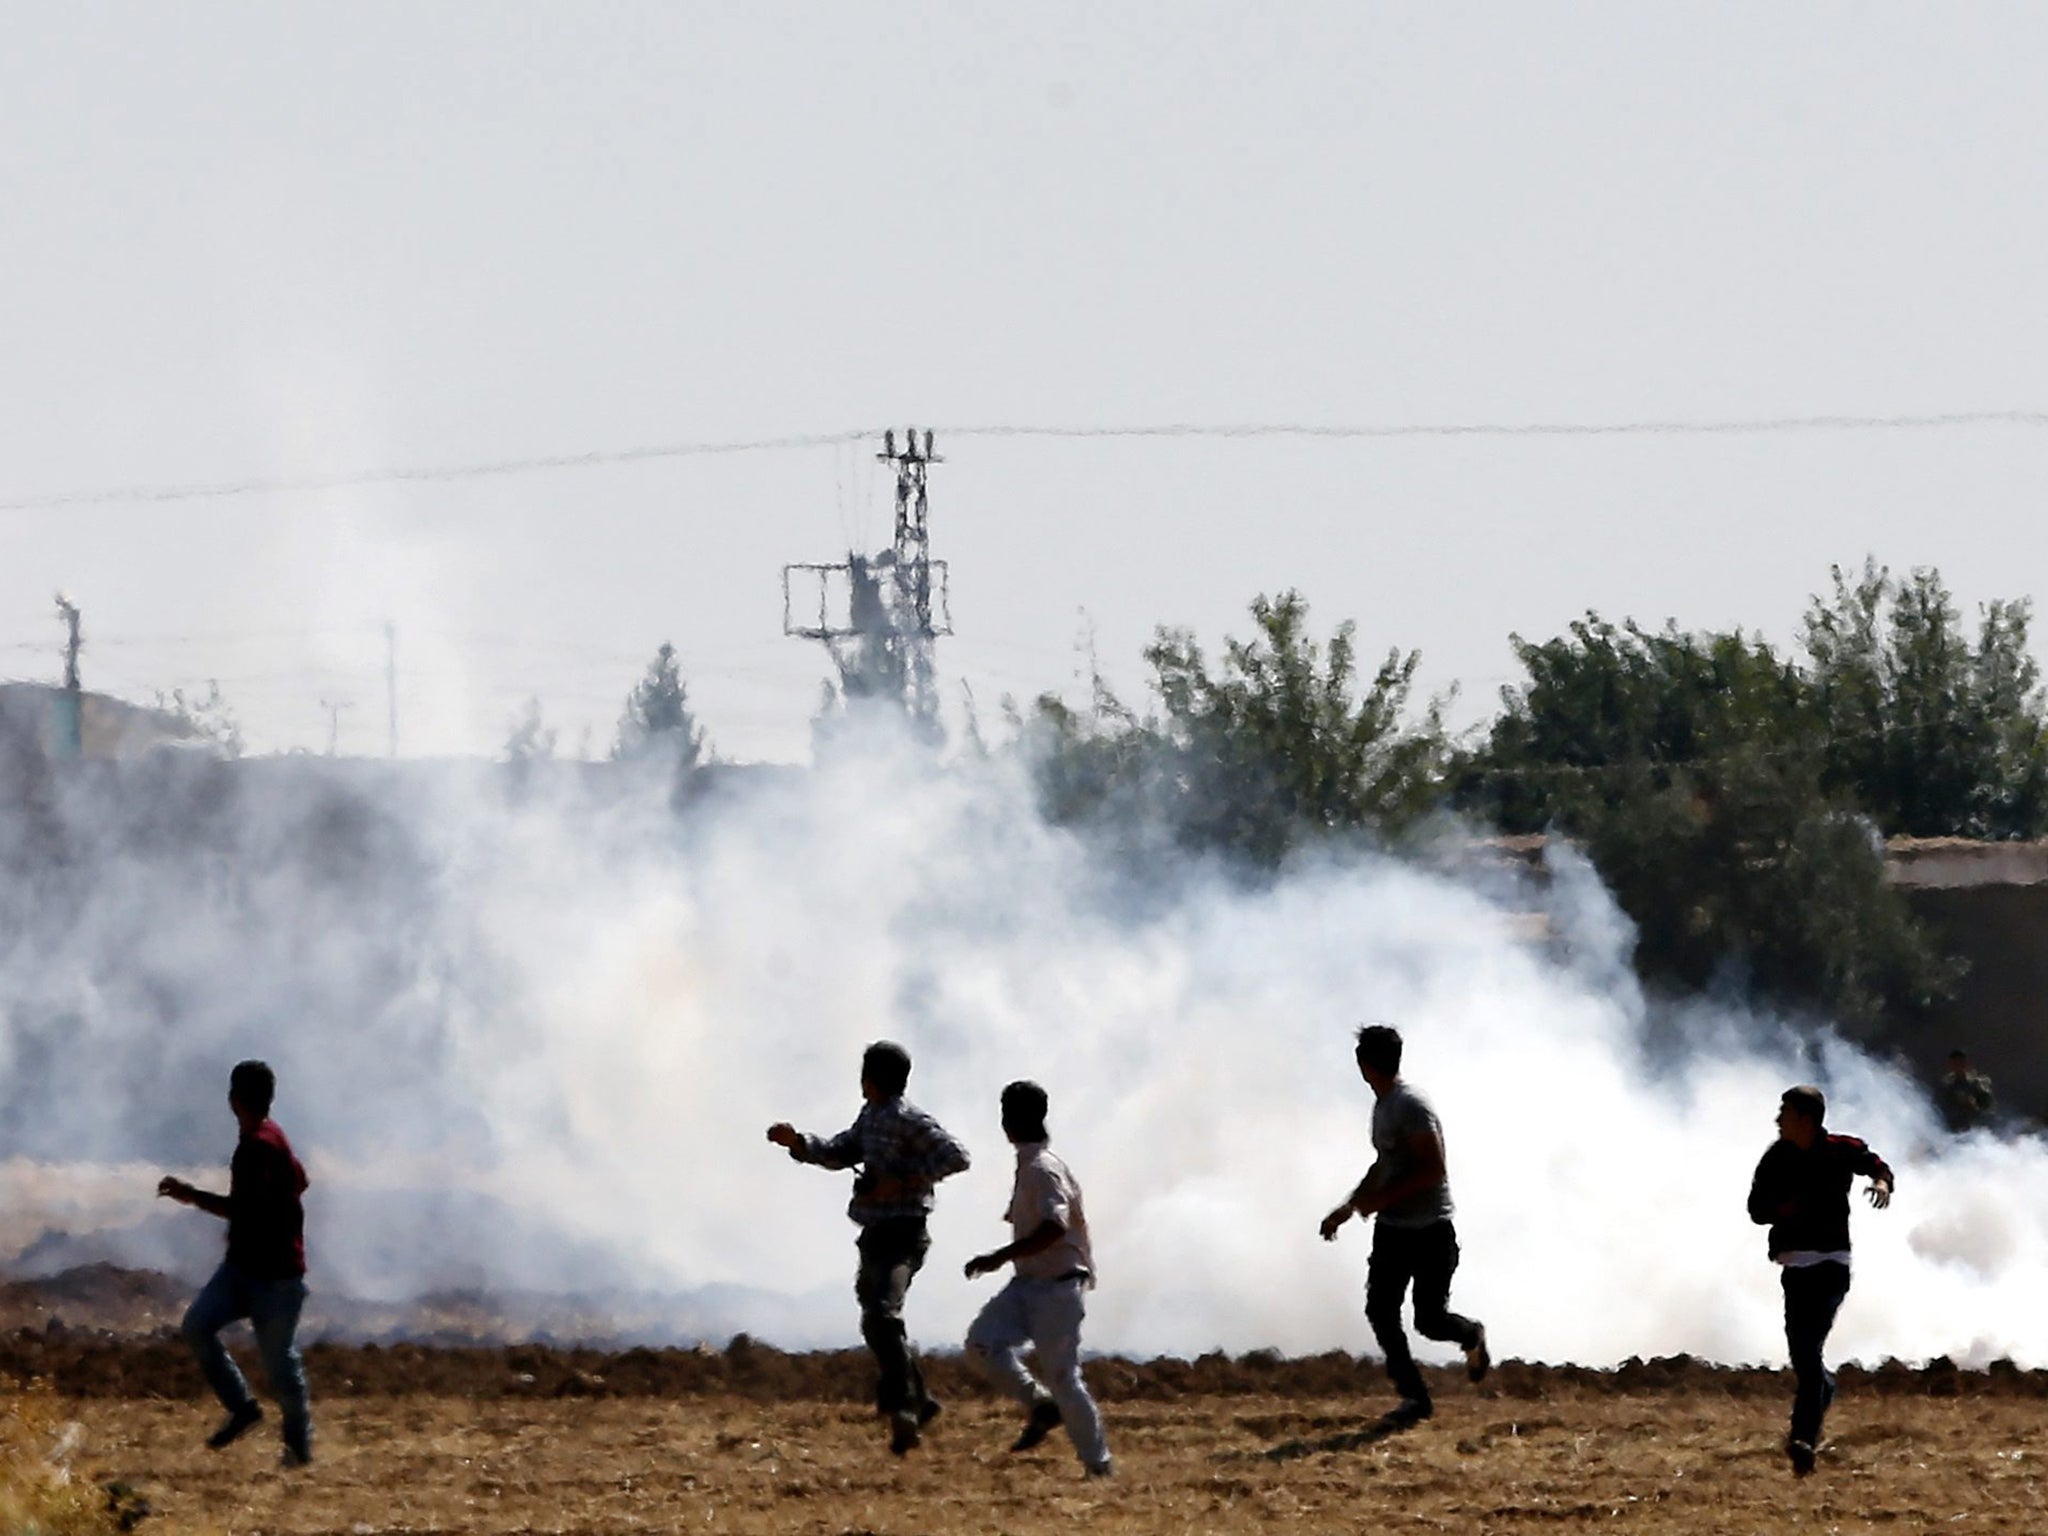 Turkish Gendarmerie use tear gas to disperse Kurdish protesters during a demonstration against the Isis, at the Syria-Turkey border near Sanliurfa